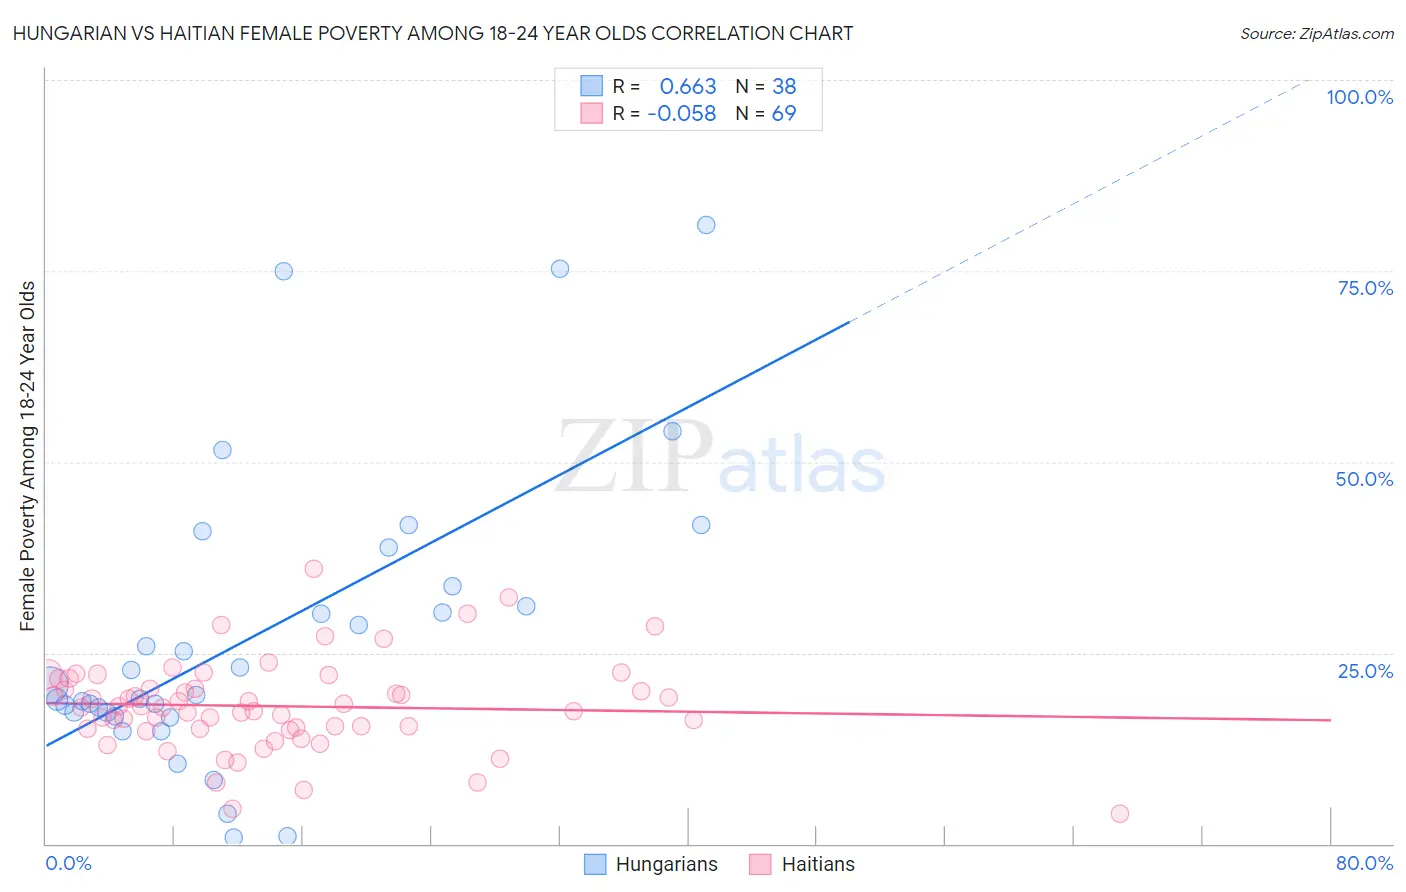 Hungarian vs Haitian Female Poverty Among 18-24 Year Olds